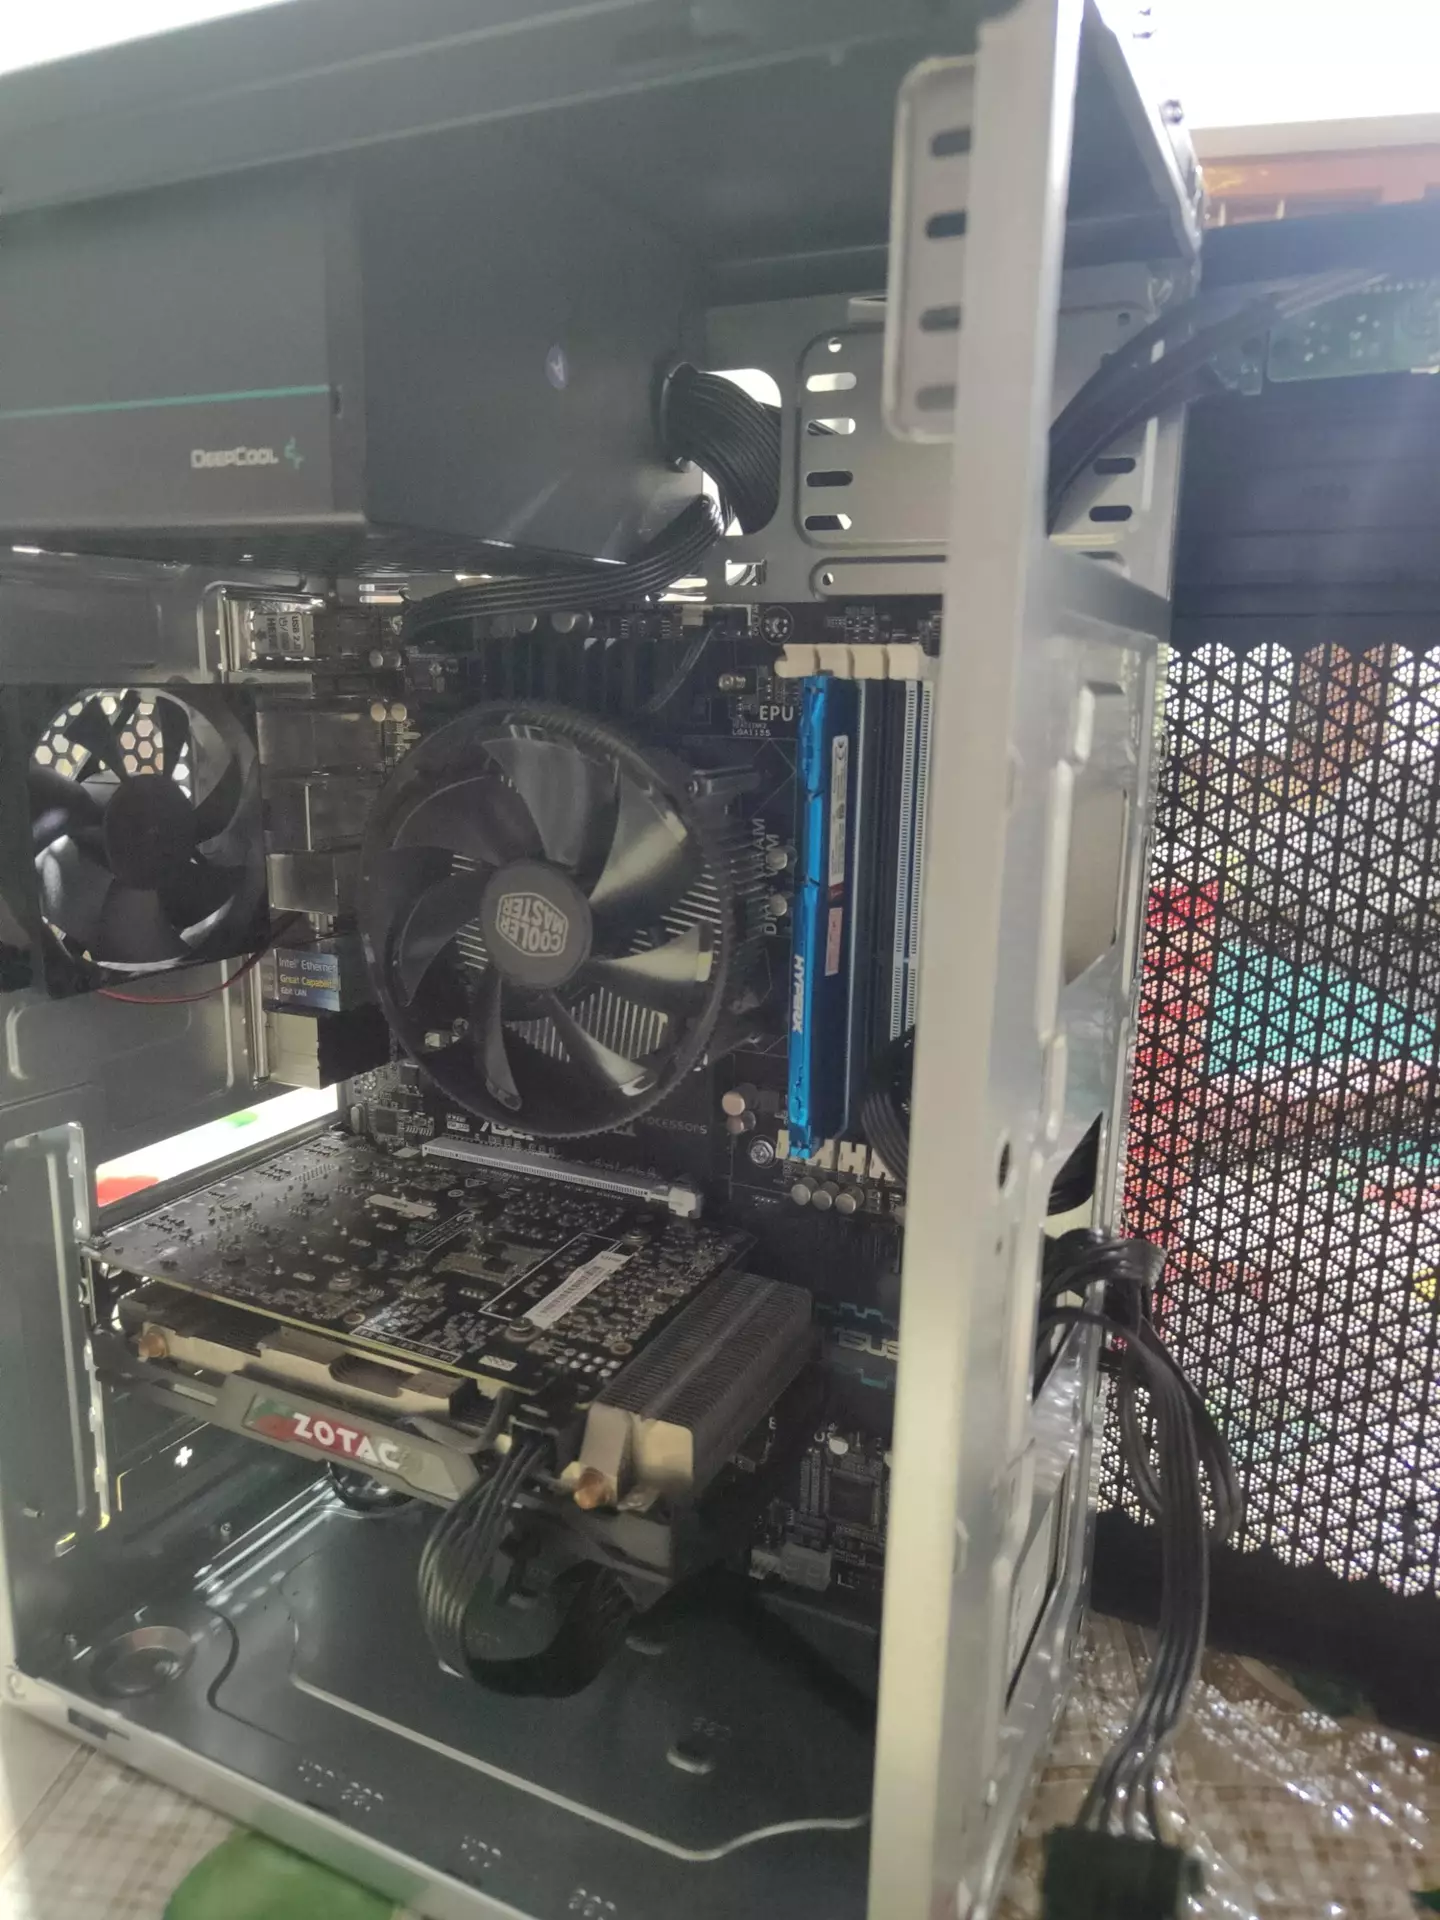 The gamer made a shocking discovery after taking apart their PC.